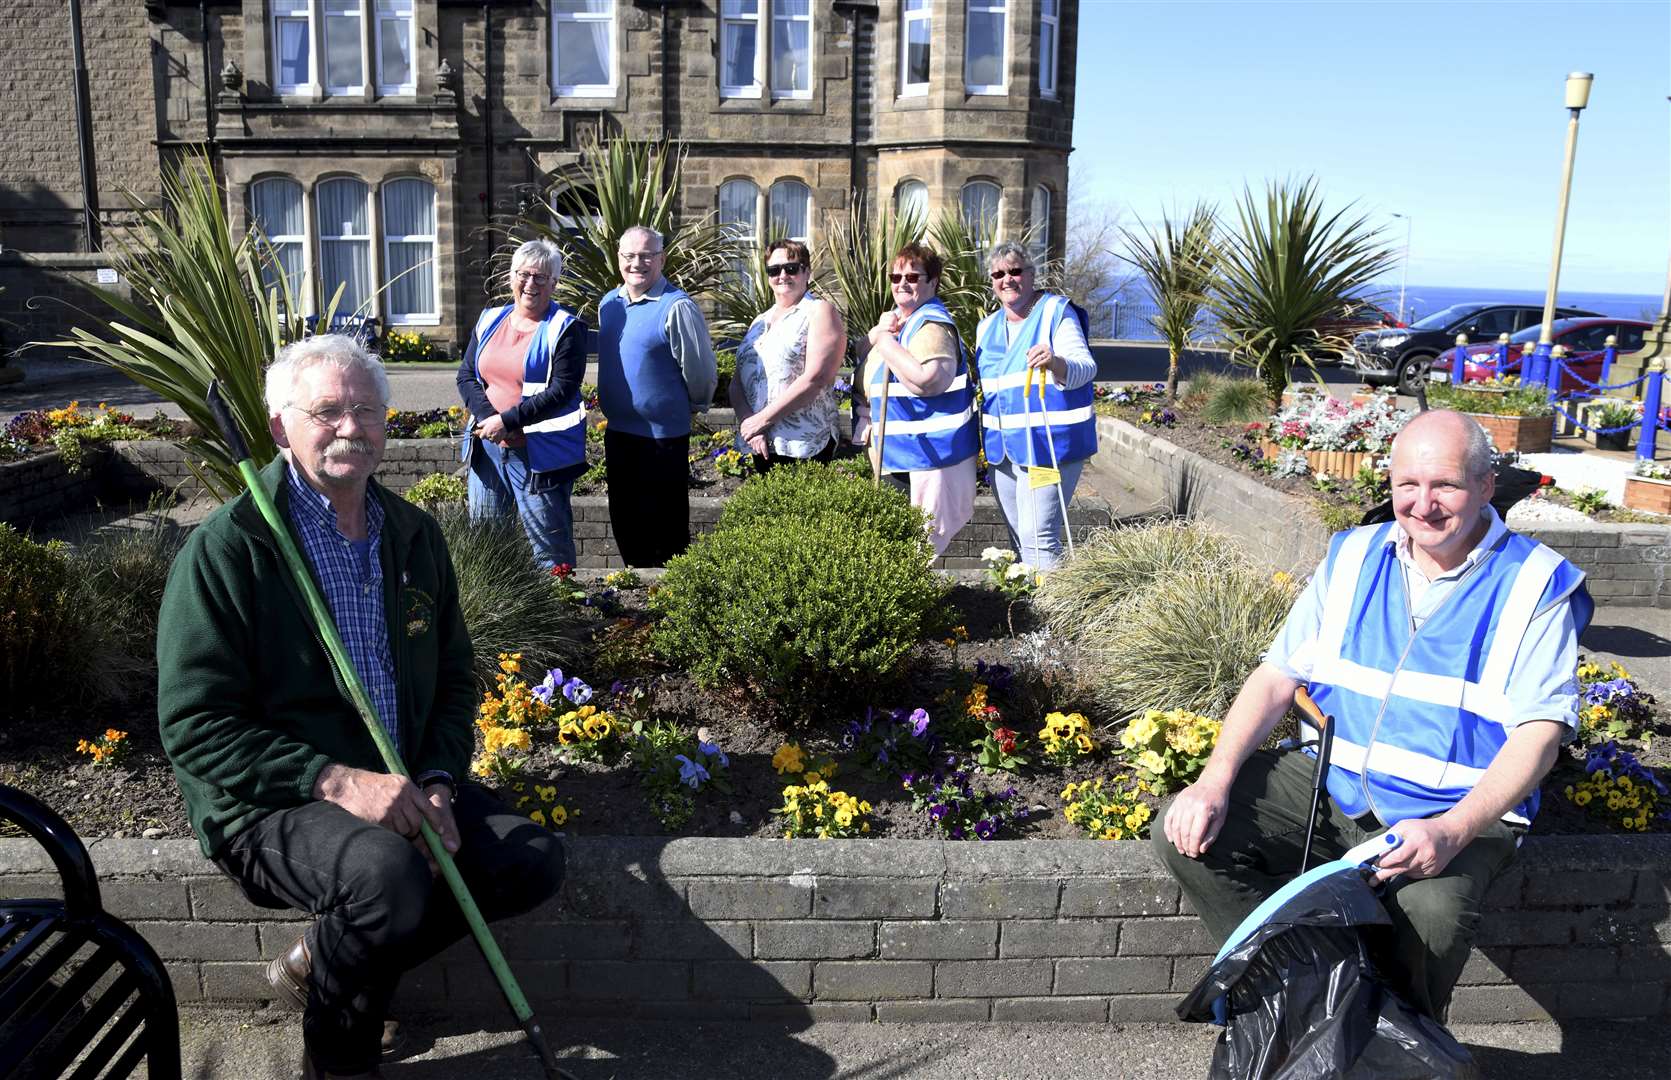 Helping keep Cluny Square beautiful – (from left) Archie Jamieson, Evelyn Flett, Gifford Leslie, Morag Stewart, Meg Jamieson, Maria and David Chambers. Picture: Becky Saunderson